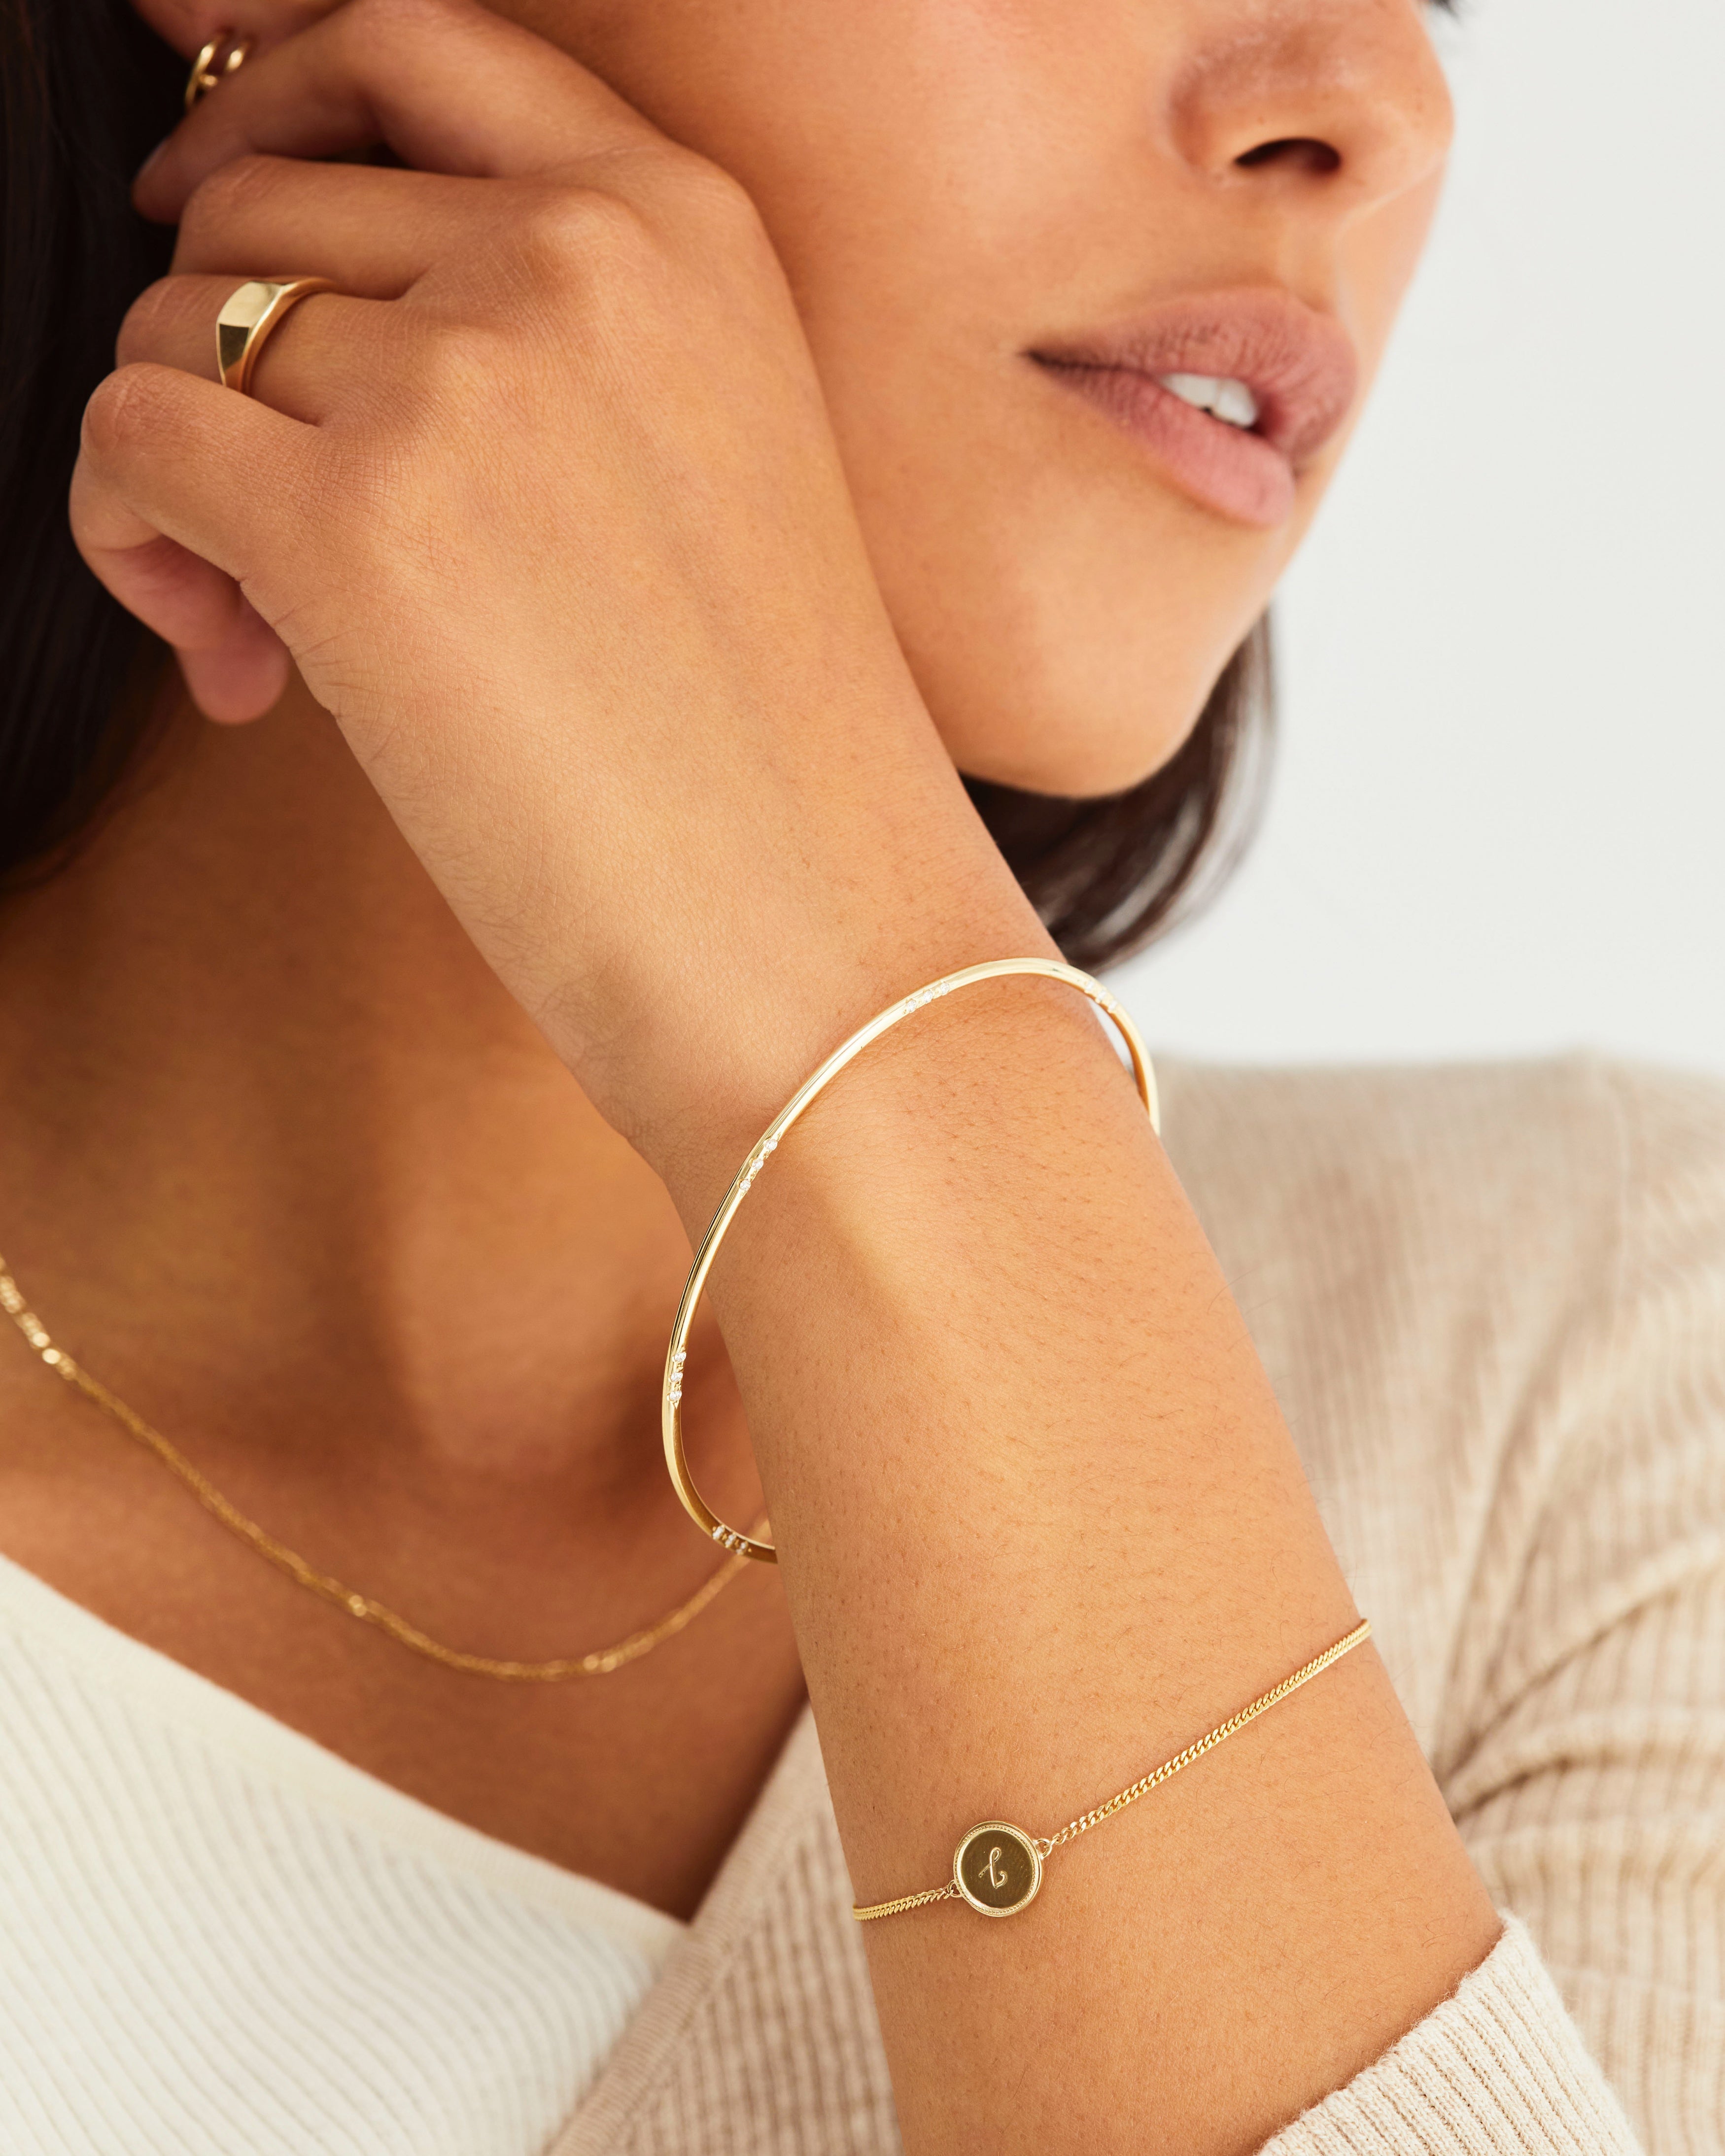 A woman wearing the Precious Initial Bracelet | Birthstone and the Cascade Oval Bangle | Diamonds, both in yellow gold.